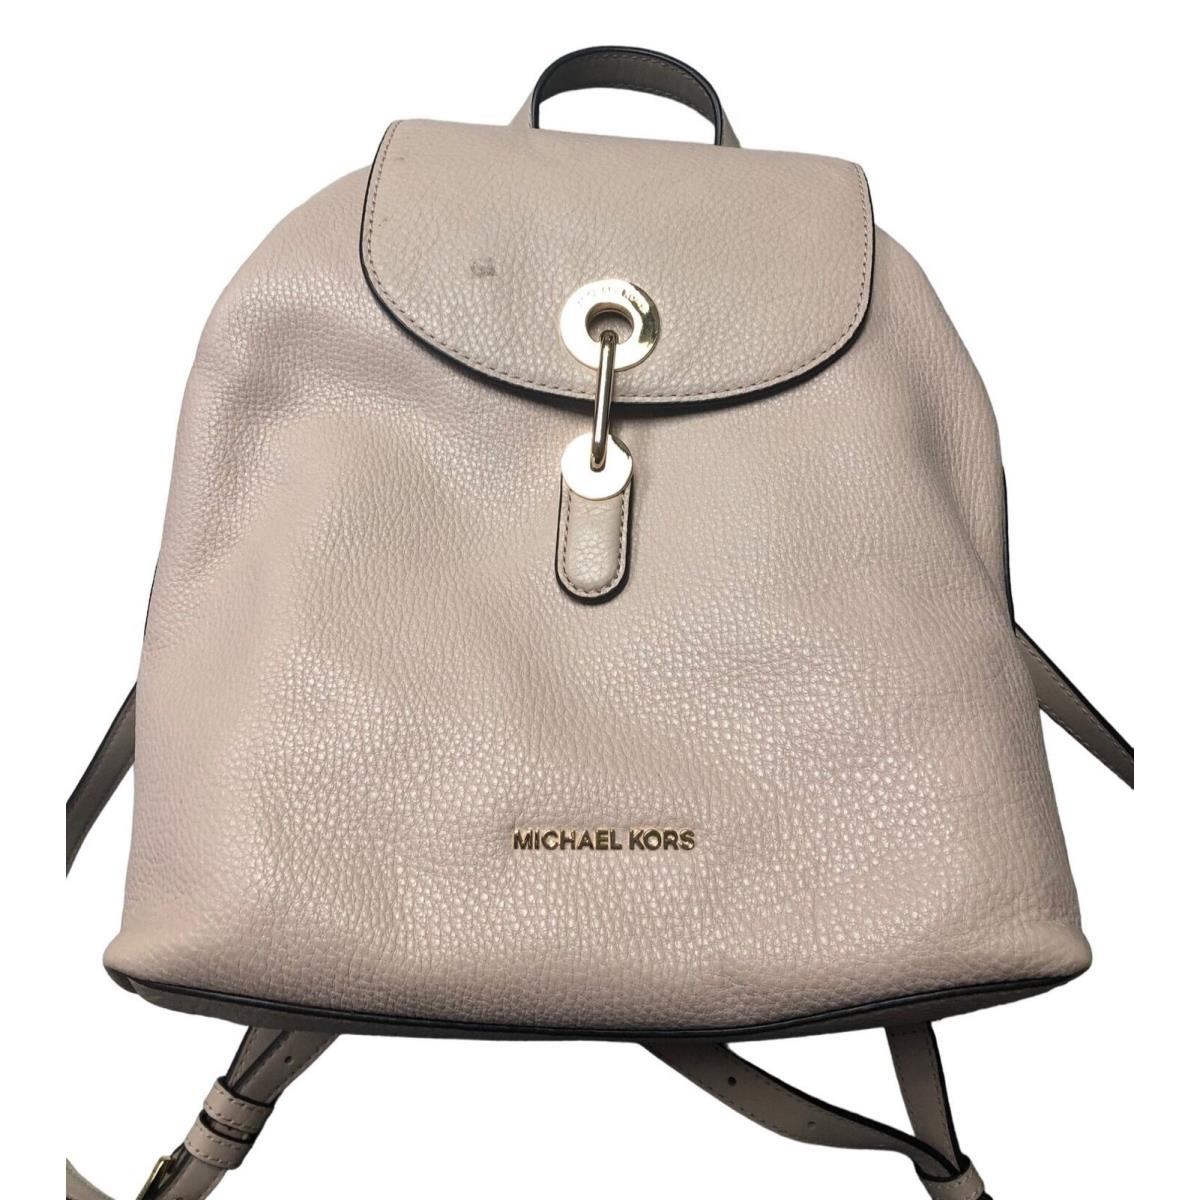 Michael Kors Raven Medium Backpack with Defects